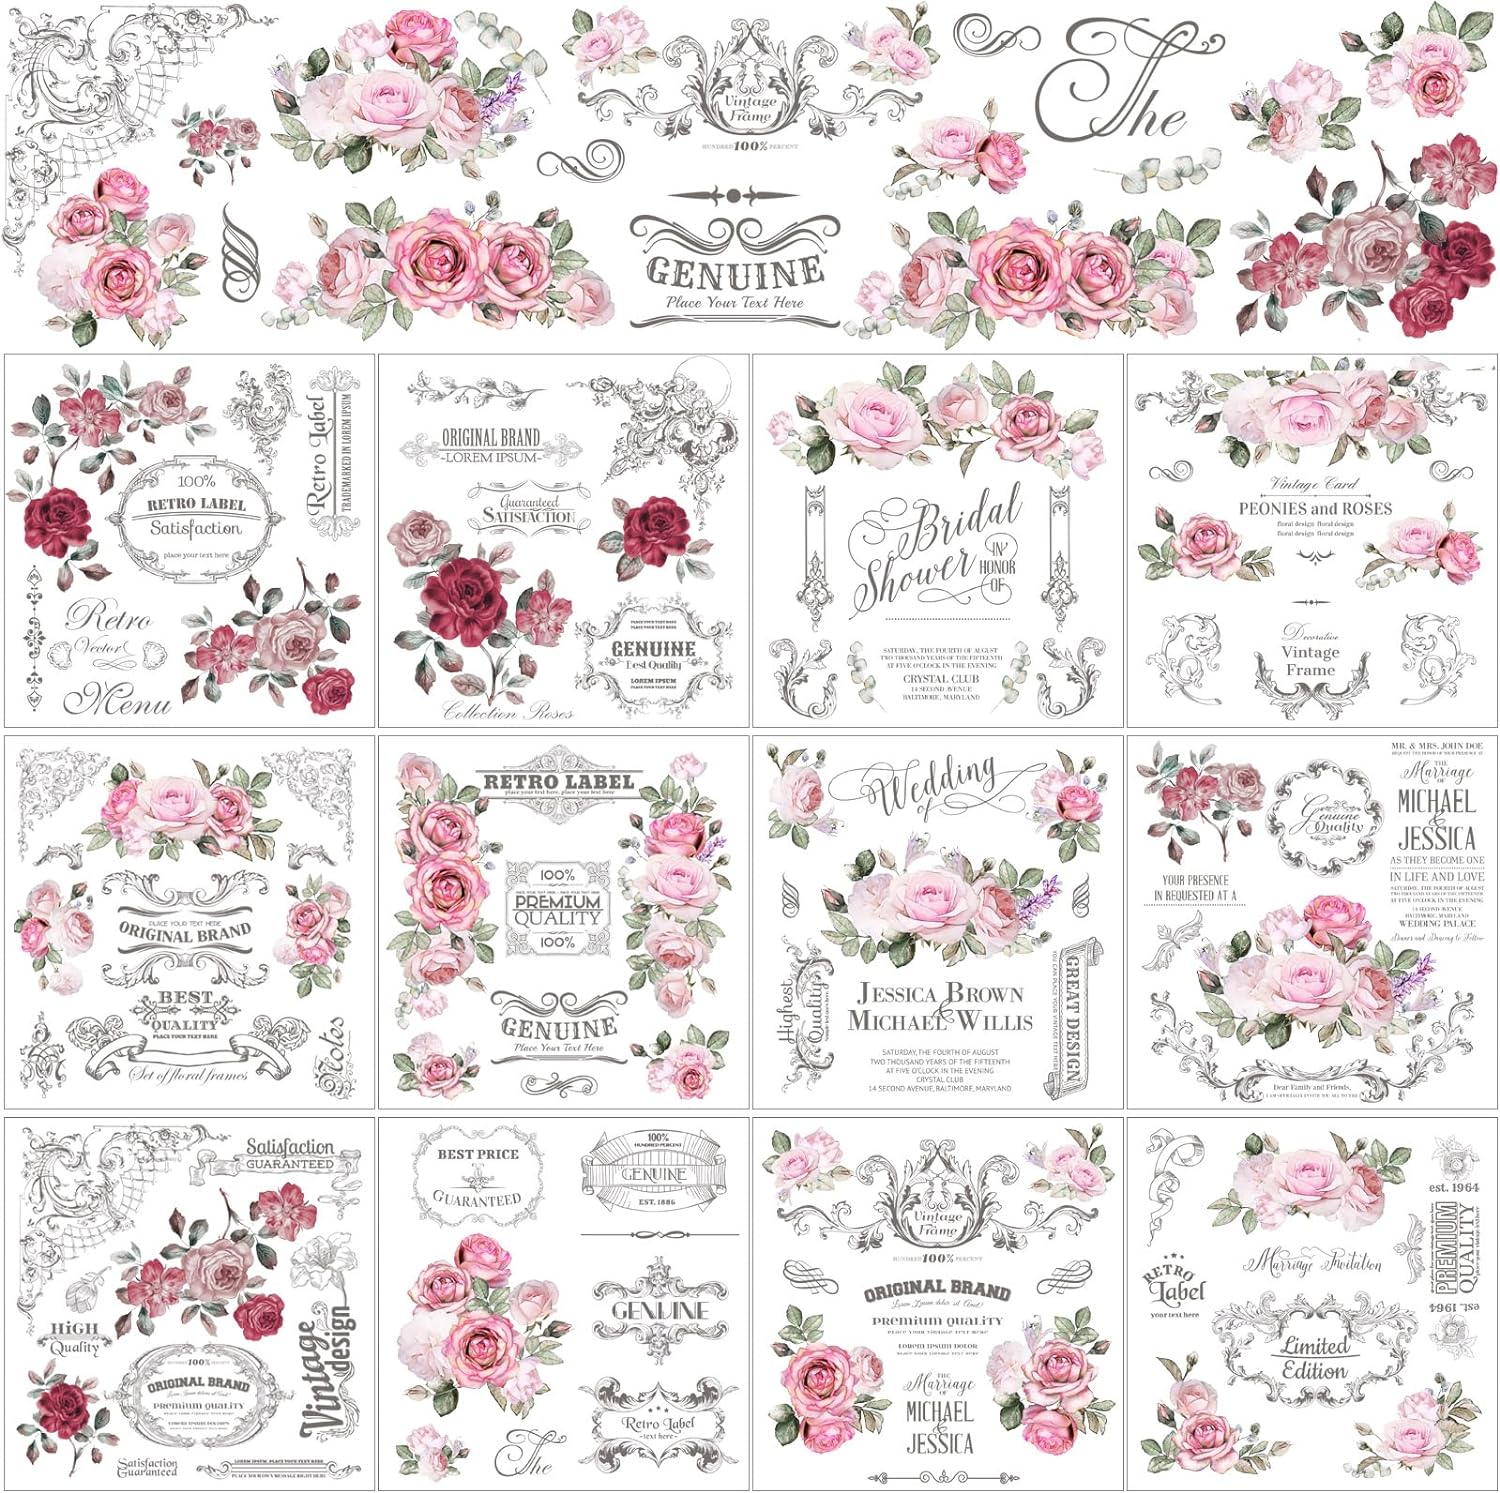 BBTO 12 Sheets Rub on Transfers for Crafts and Furniture Rub on Transfer Stickers Rub on Decals for Wood DIY Paper Home Decor, 5.5 x 5.7 Inch(Retro Rose)